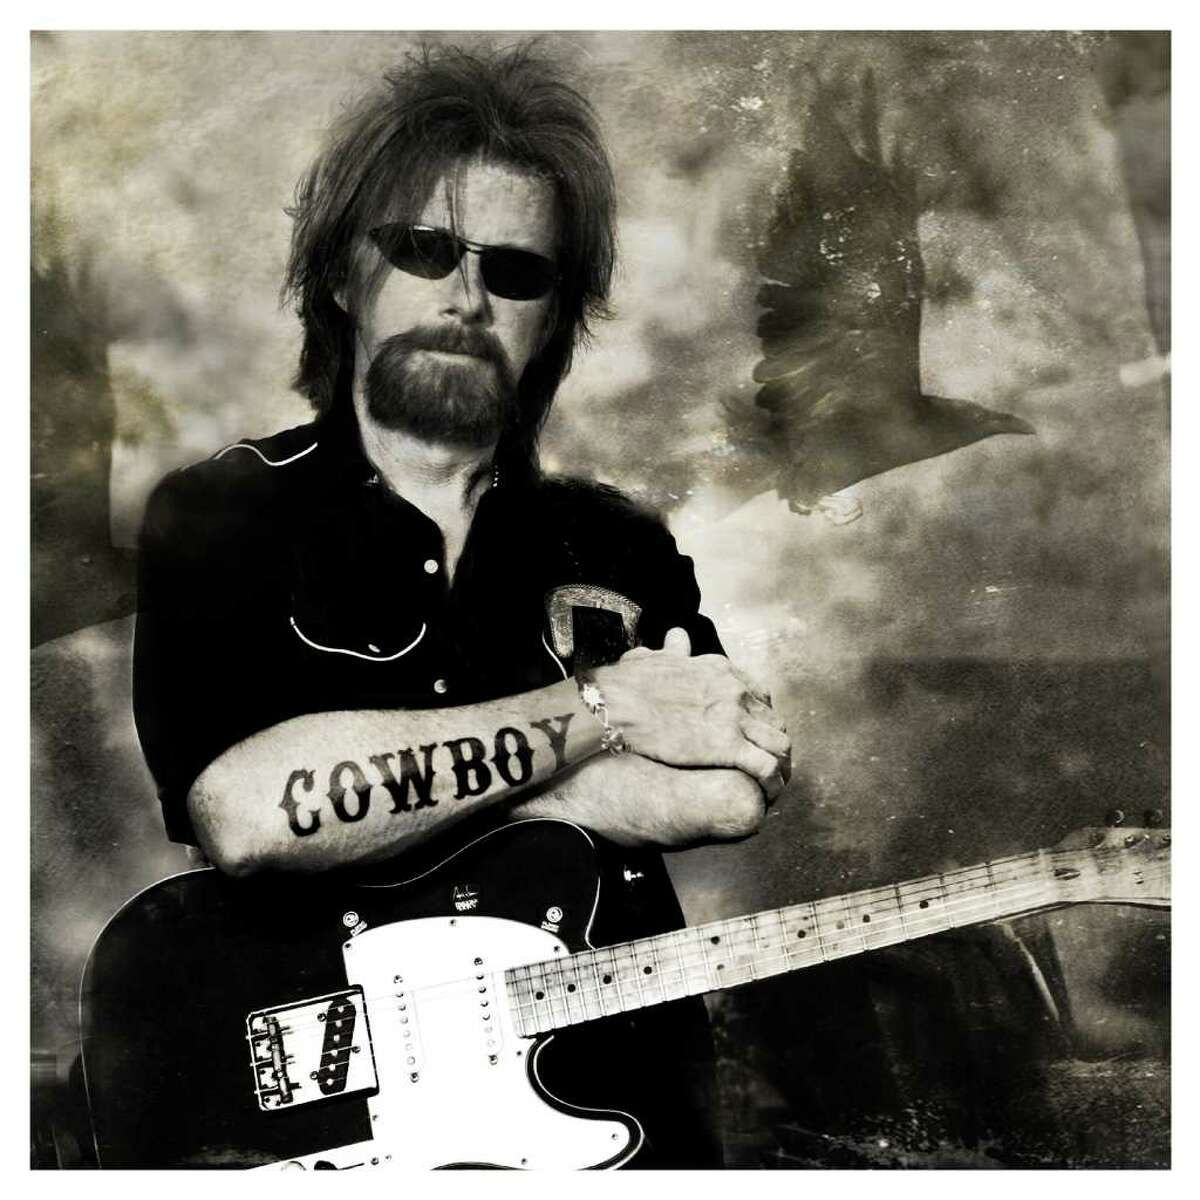 Ronnie Dunn will perform at Nutty Jerry's tonight at 7. General admission is $25.